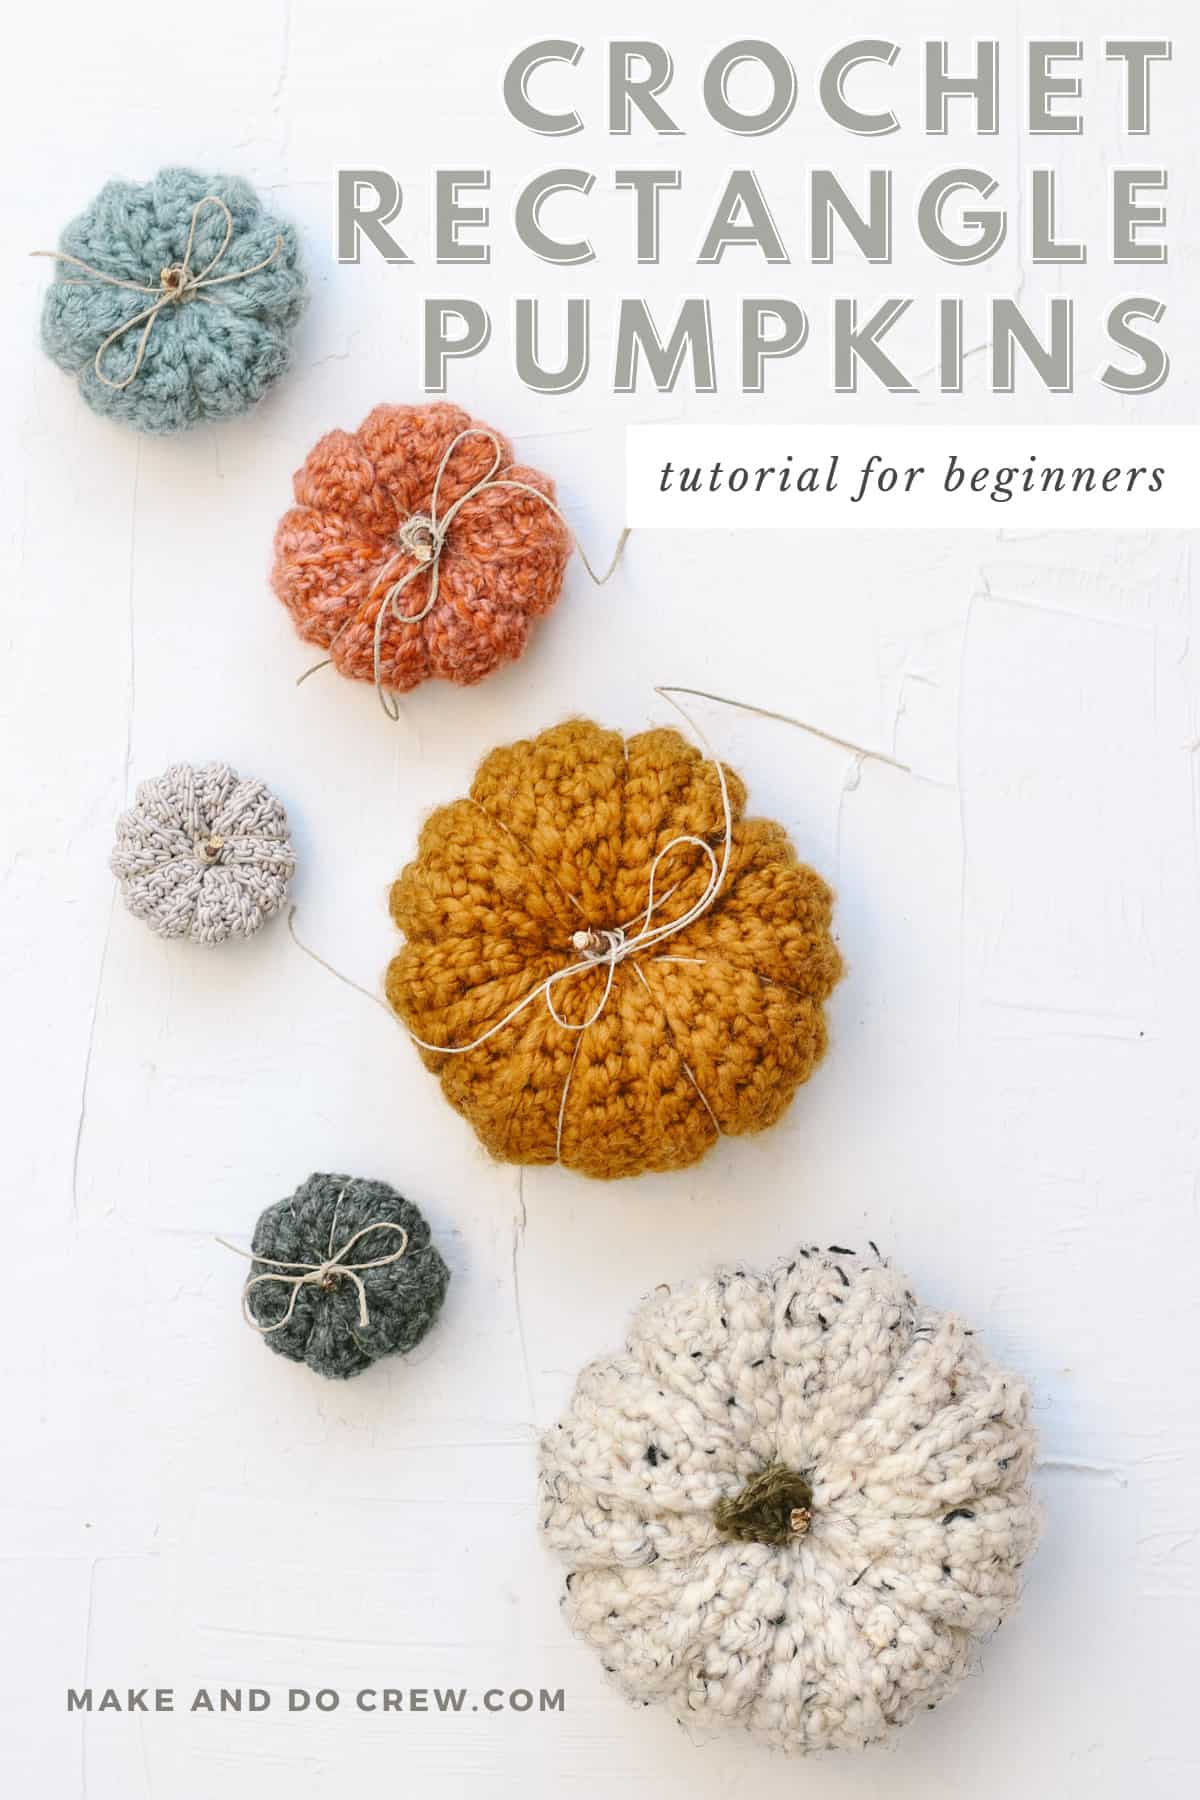 An overhead view of small, medium and large crochet pumpkins with jute tied around the stems.